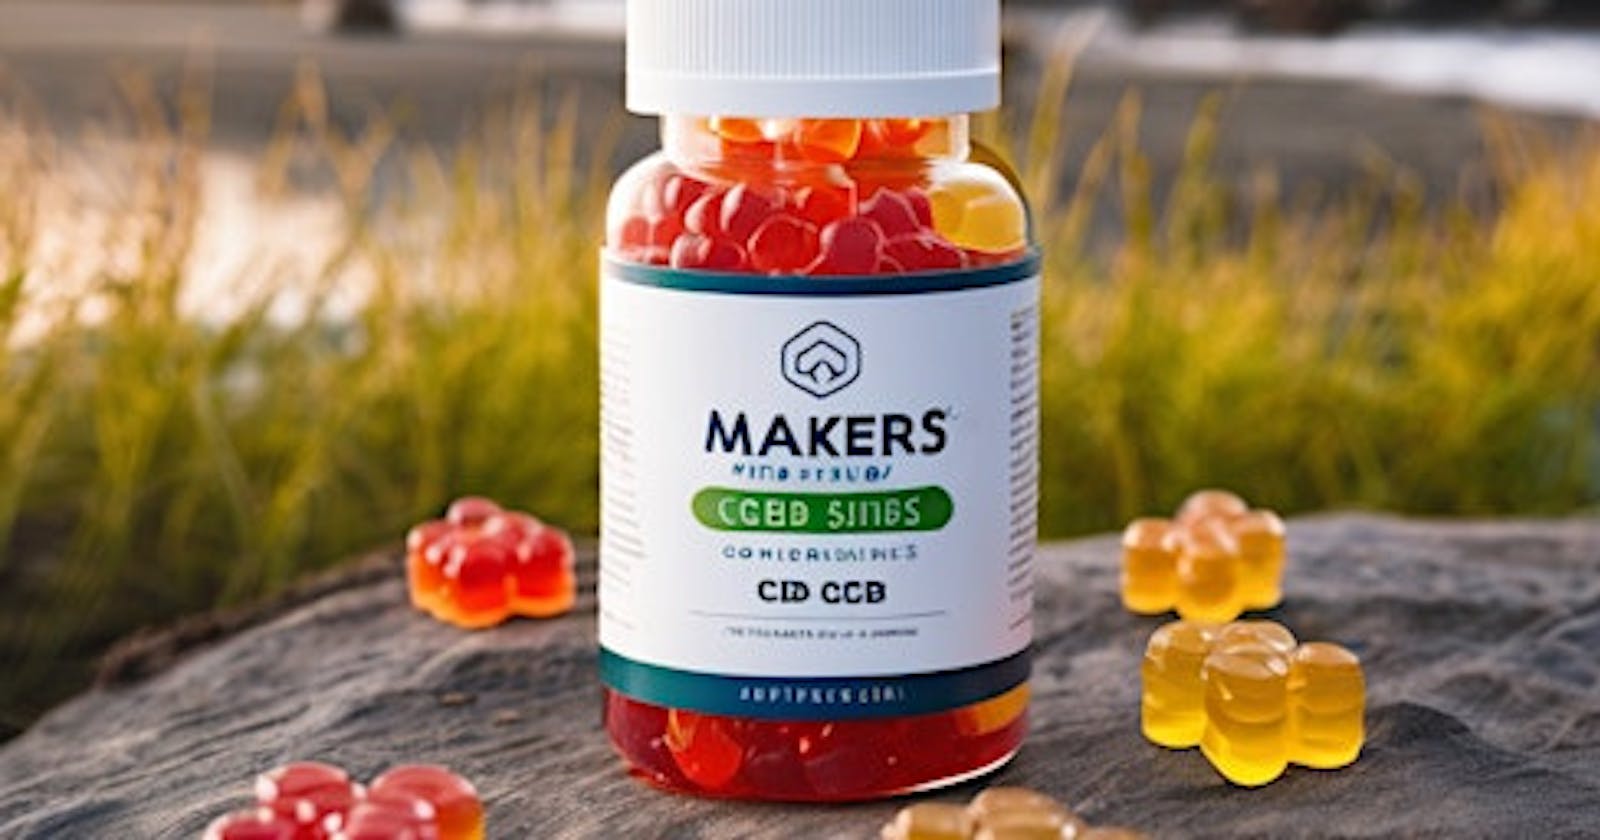 Makers CBD Gummies Price And Details